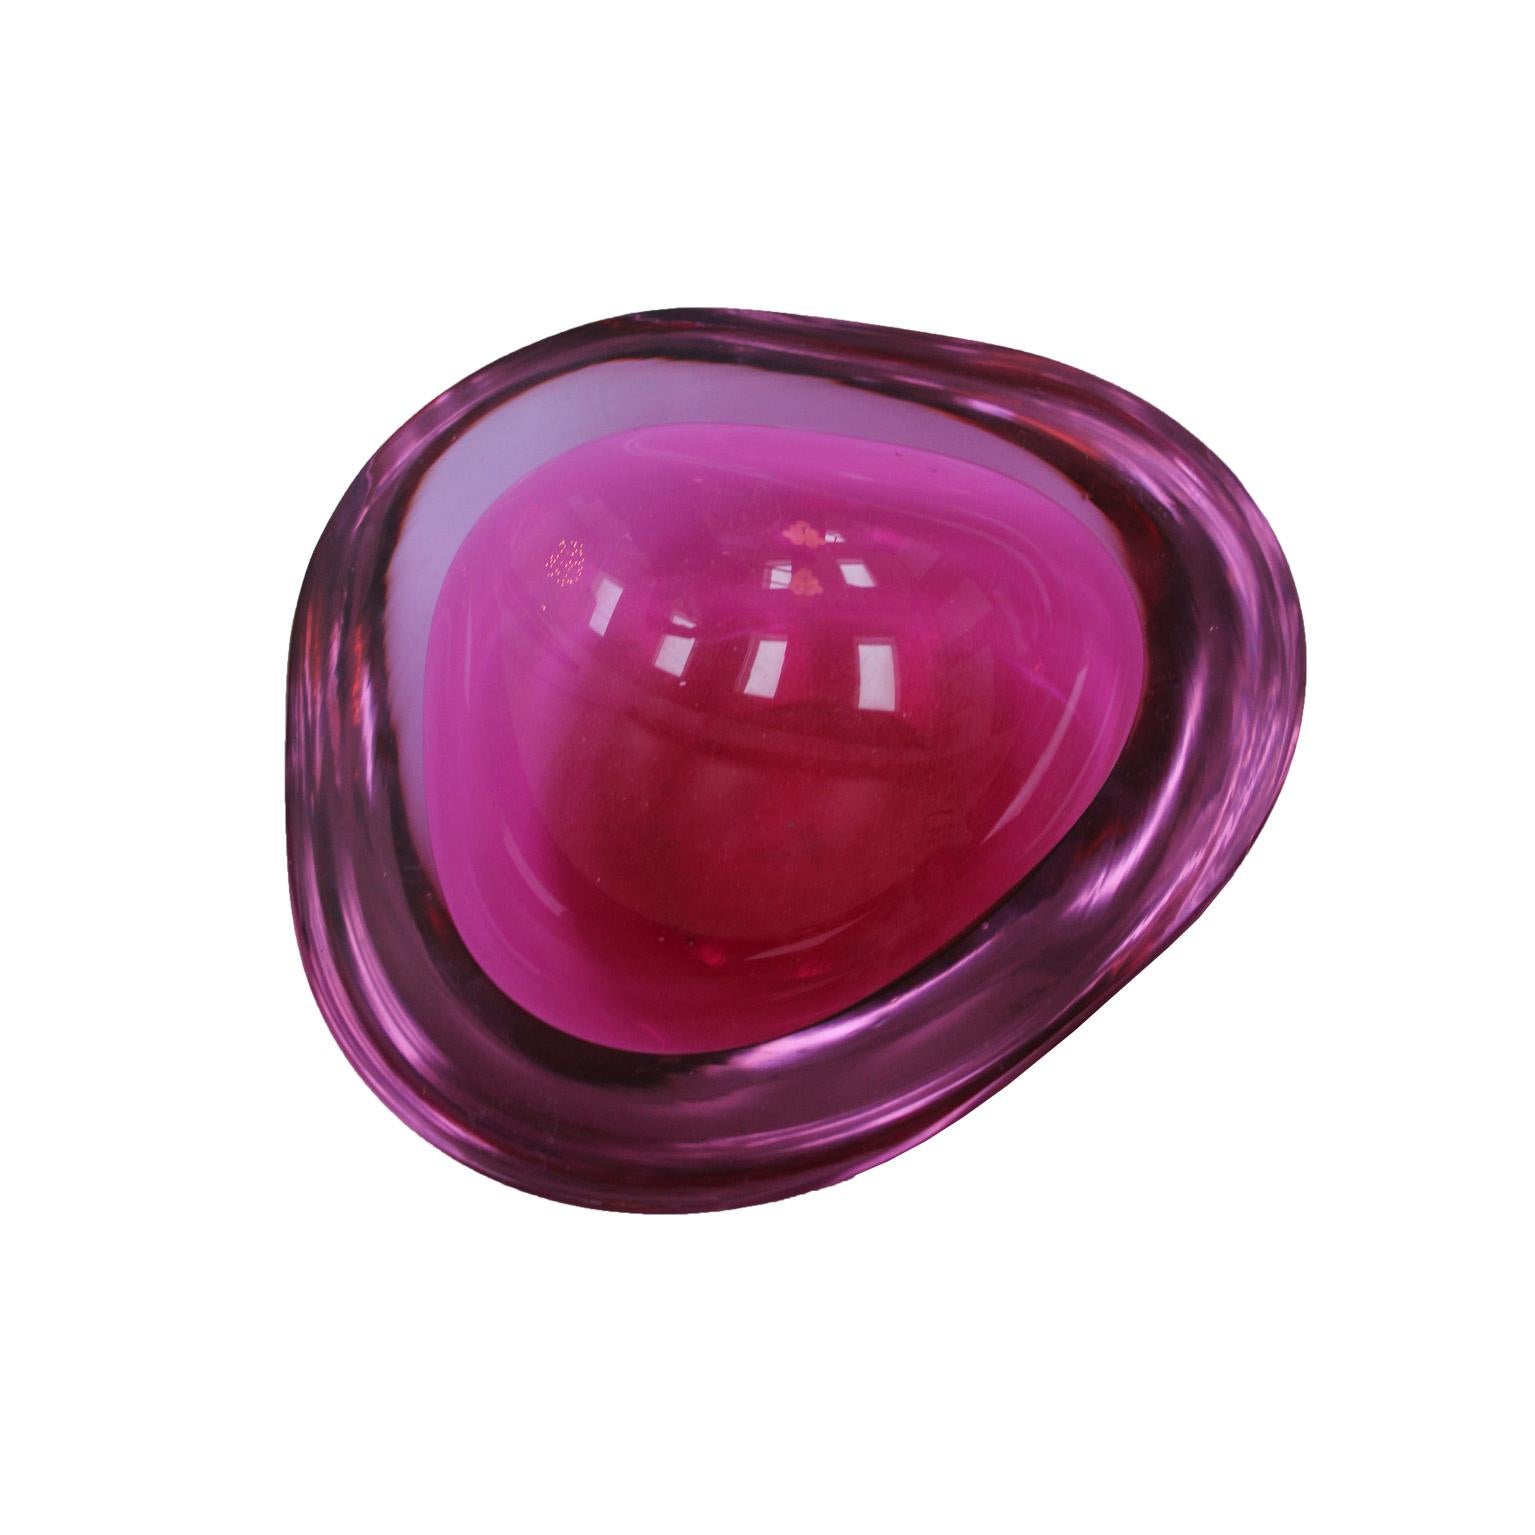 Italian Mid-Century Modern Pink Sommerso Murano Glass Bowl by Flavio Poli 1950 For Sale